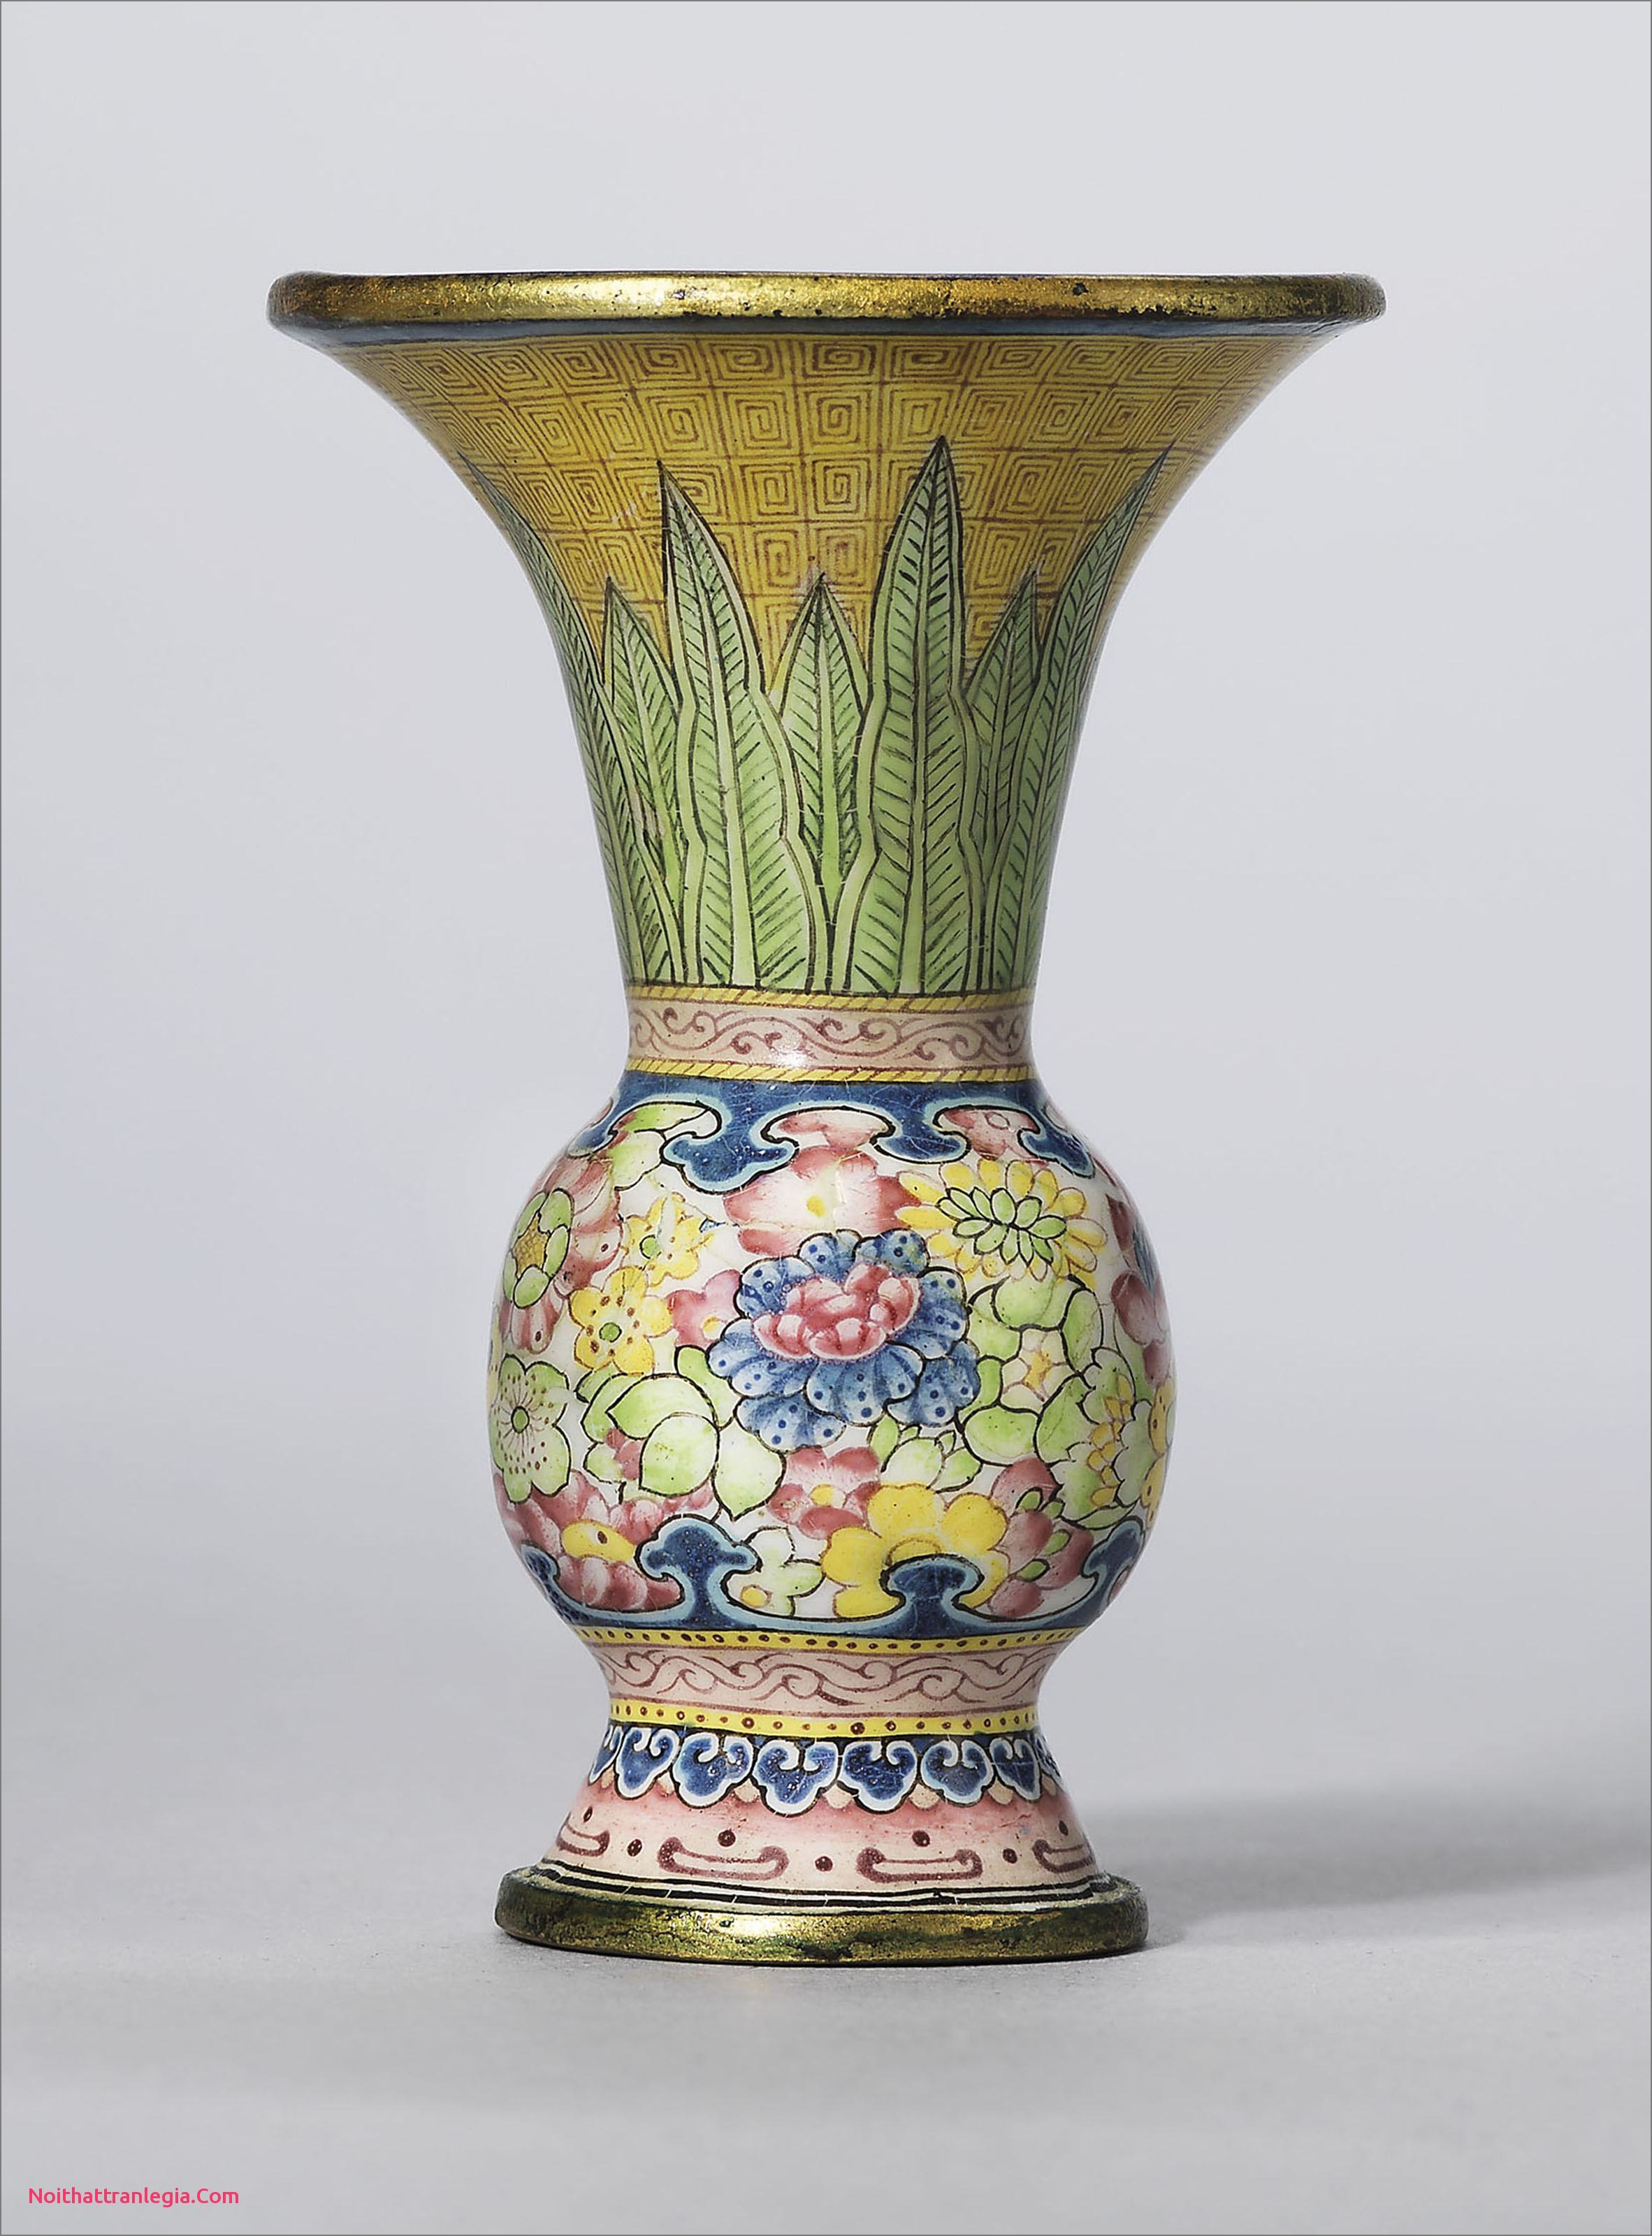 10 Spectacular Antique Yellow Glass Vase 2024 free download antique yellow glass vase of 20 chinese antique vase noithattranlegia vases design regarding chinese antique vase unique a guide to the symbolism of flowers on chinese ceramics of chinese an